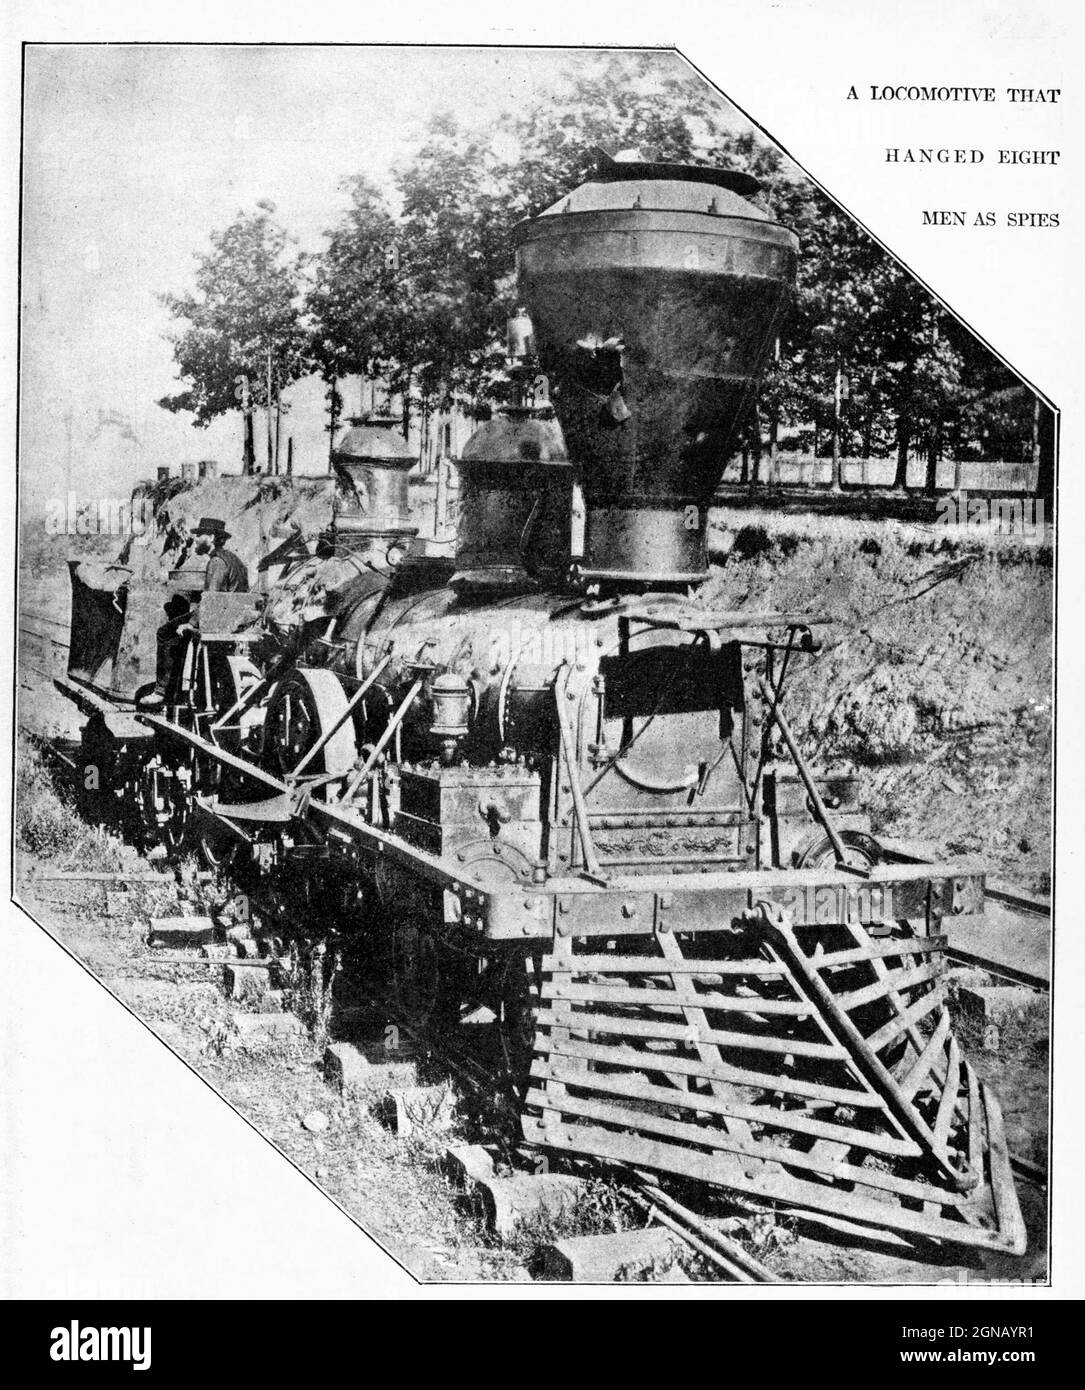 A Locomotive that hanged 8 men as spies from the book ' The Civil war through the camera ' hundreds of vivid photographs actually taken in Civil war times, sixteen reproductions in color of famous war paintings. The new text history by Henry W. Elson. A. complete illustrated history of the Civil war Stock Photo